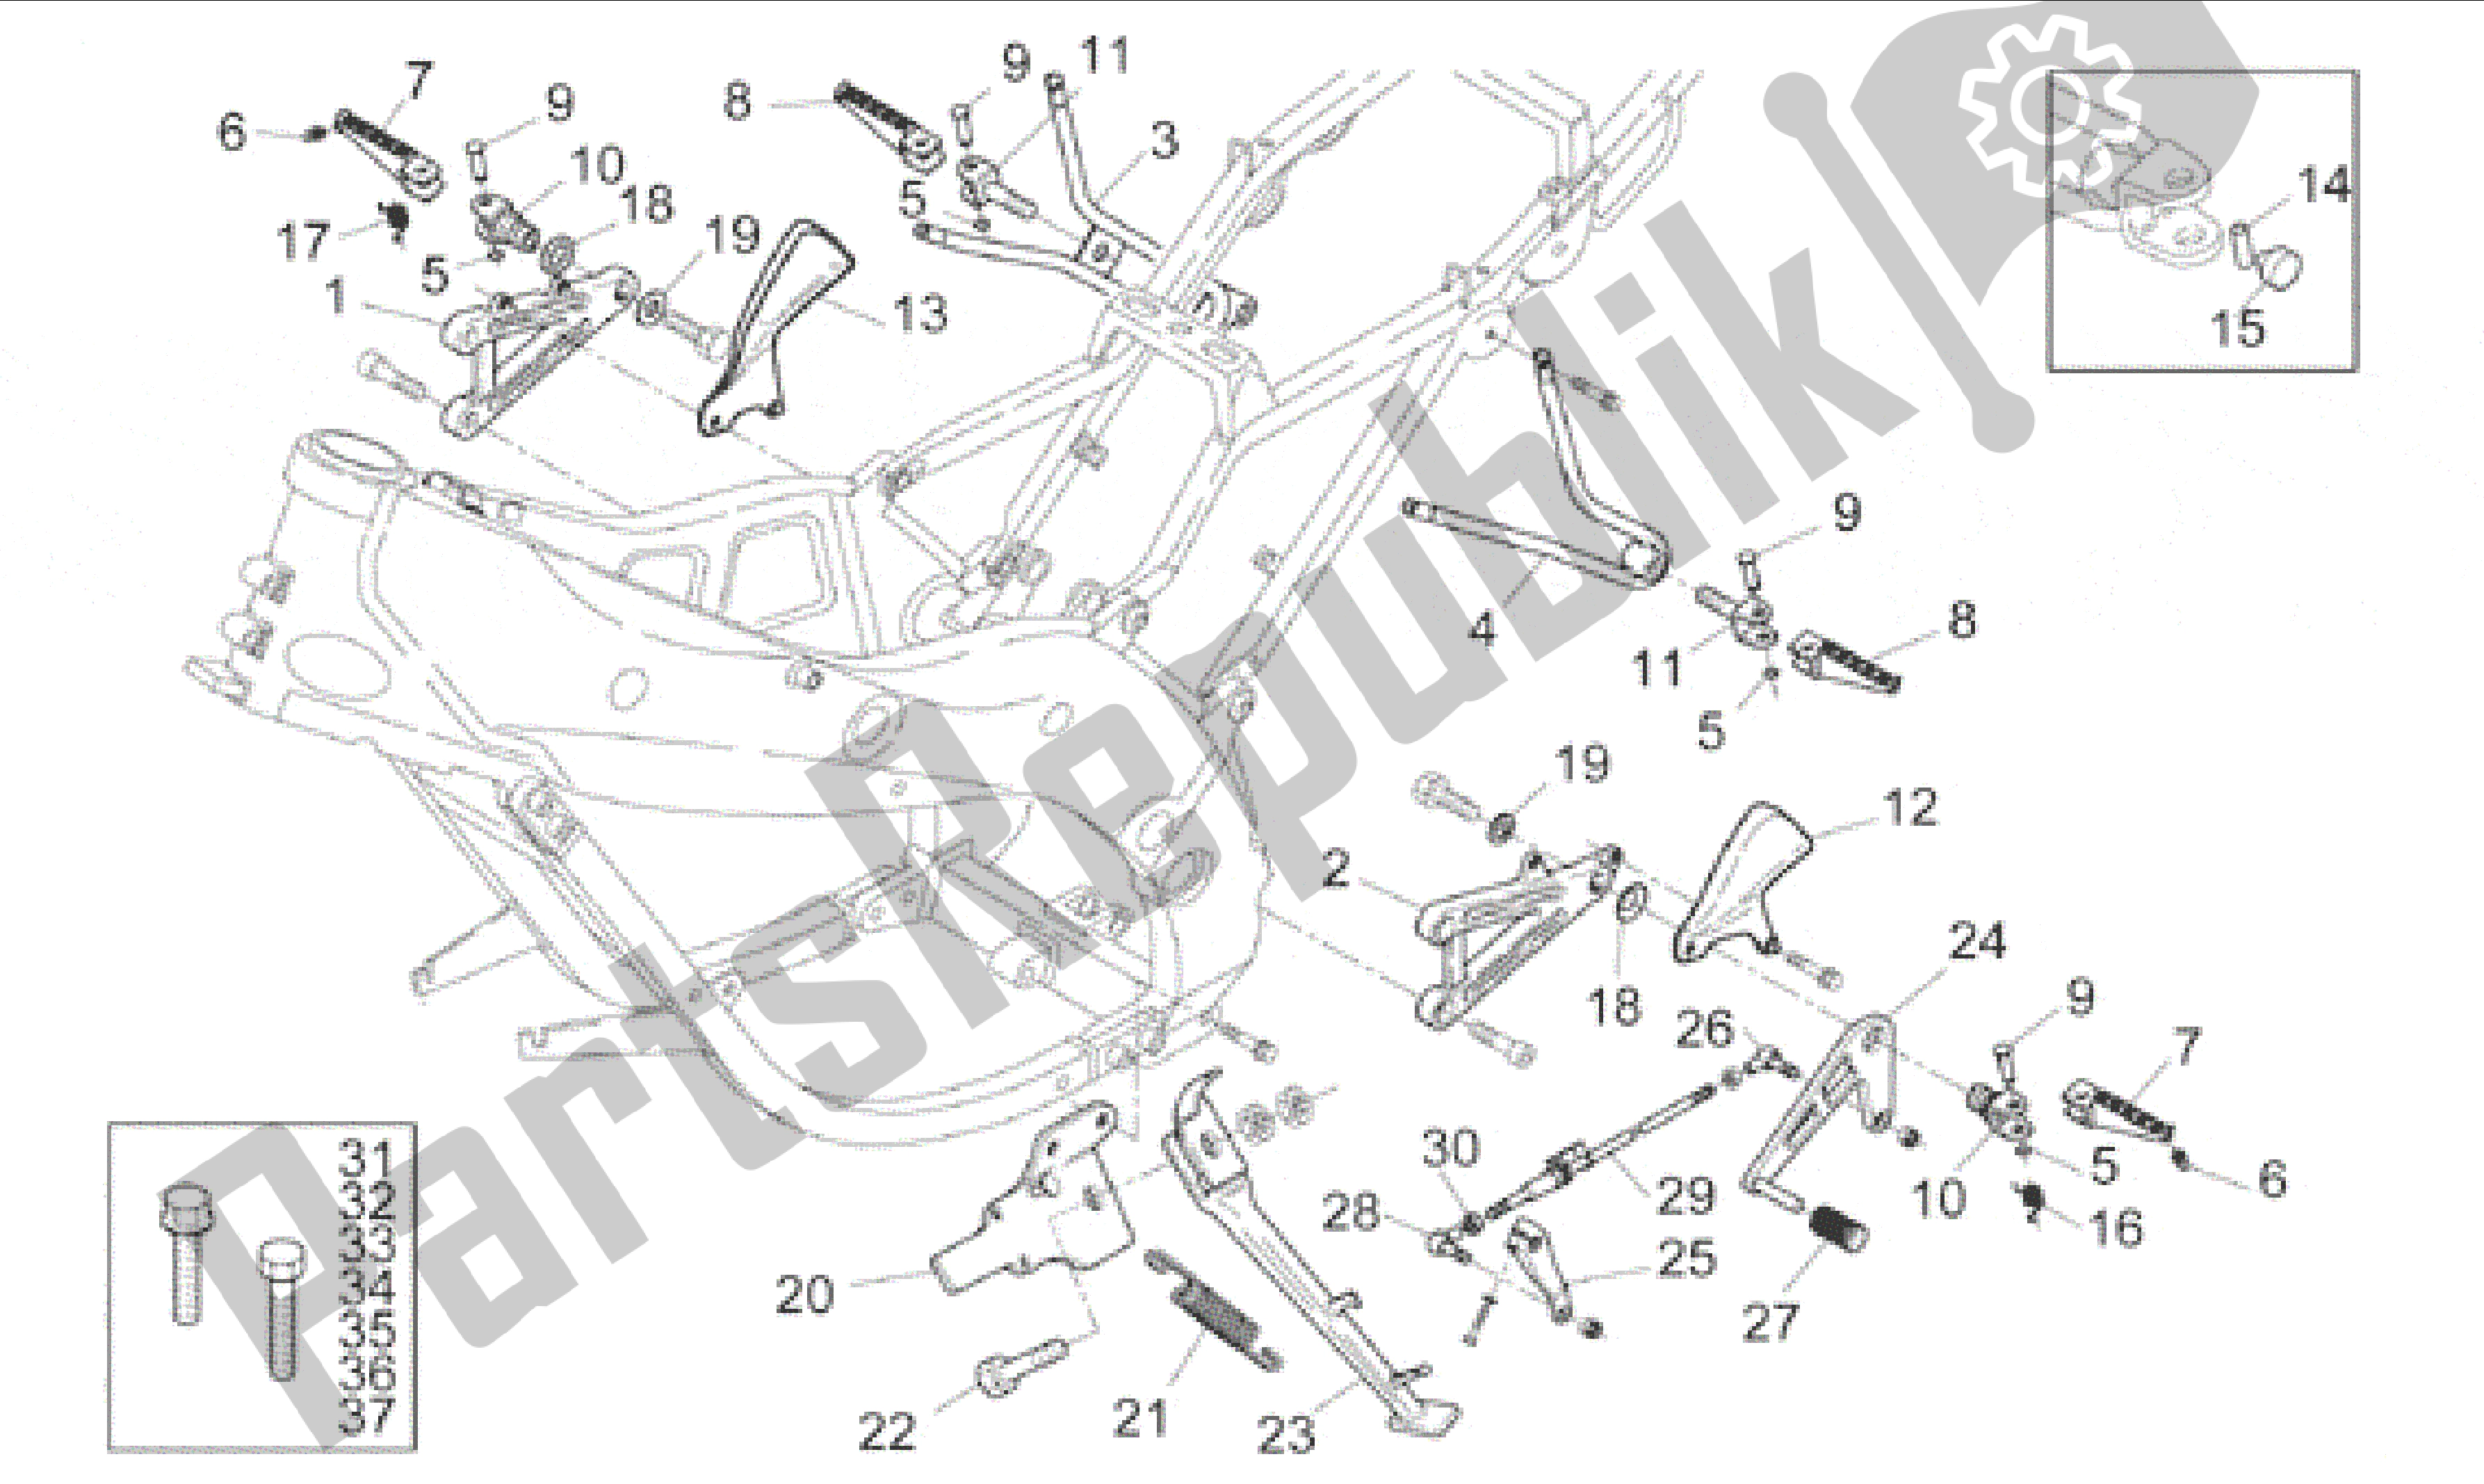 All parts for the Foot Rests - Lateral Stand of the Aprilia RS 250 1995 - 1997